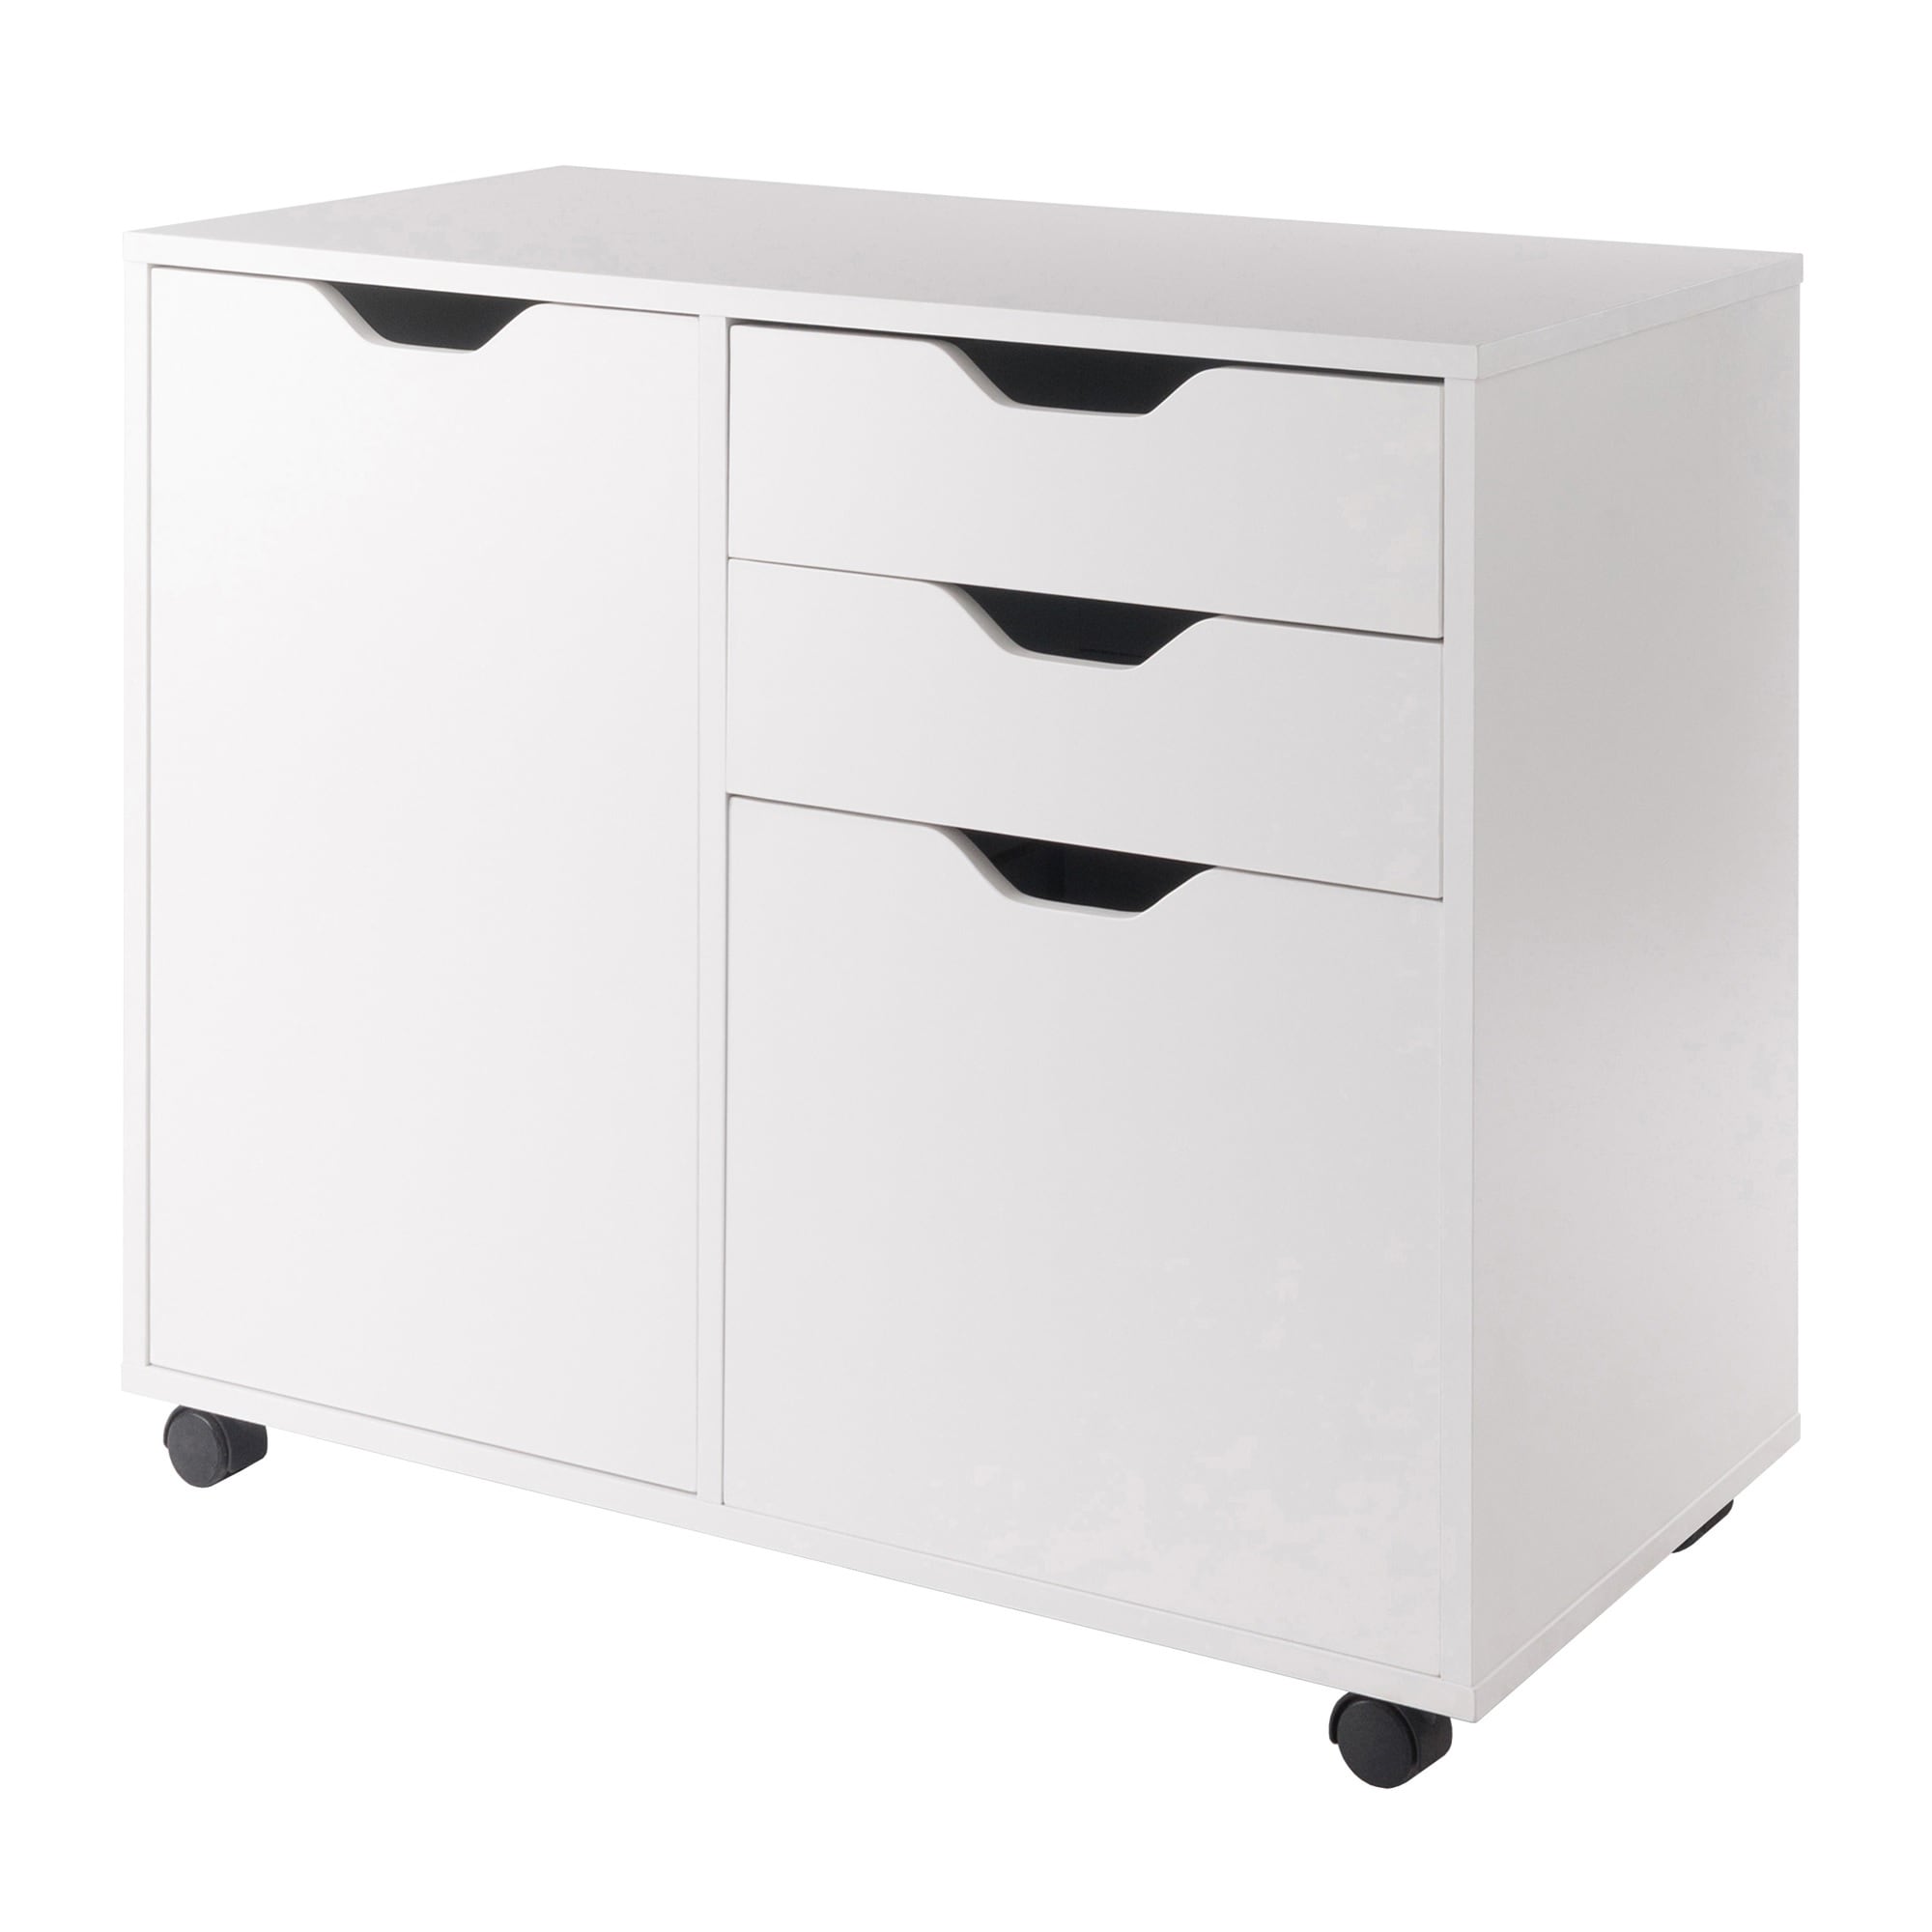 30.75" White Two Section Mobile Filing Cabinet